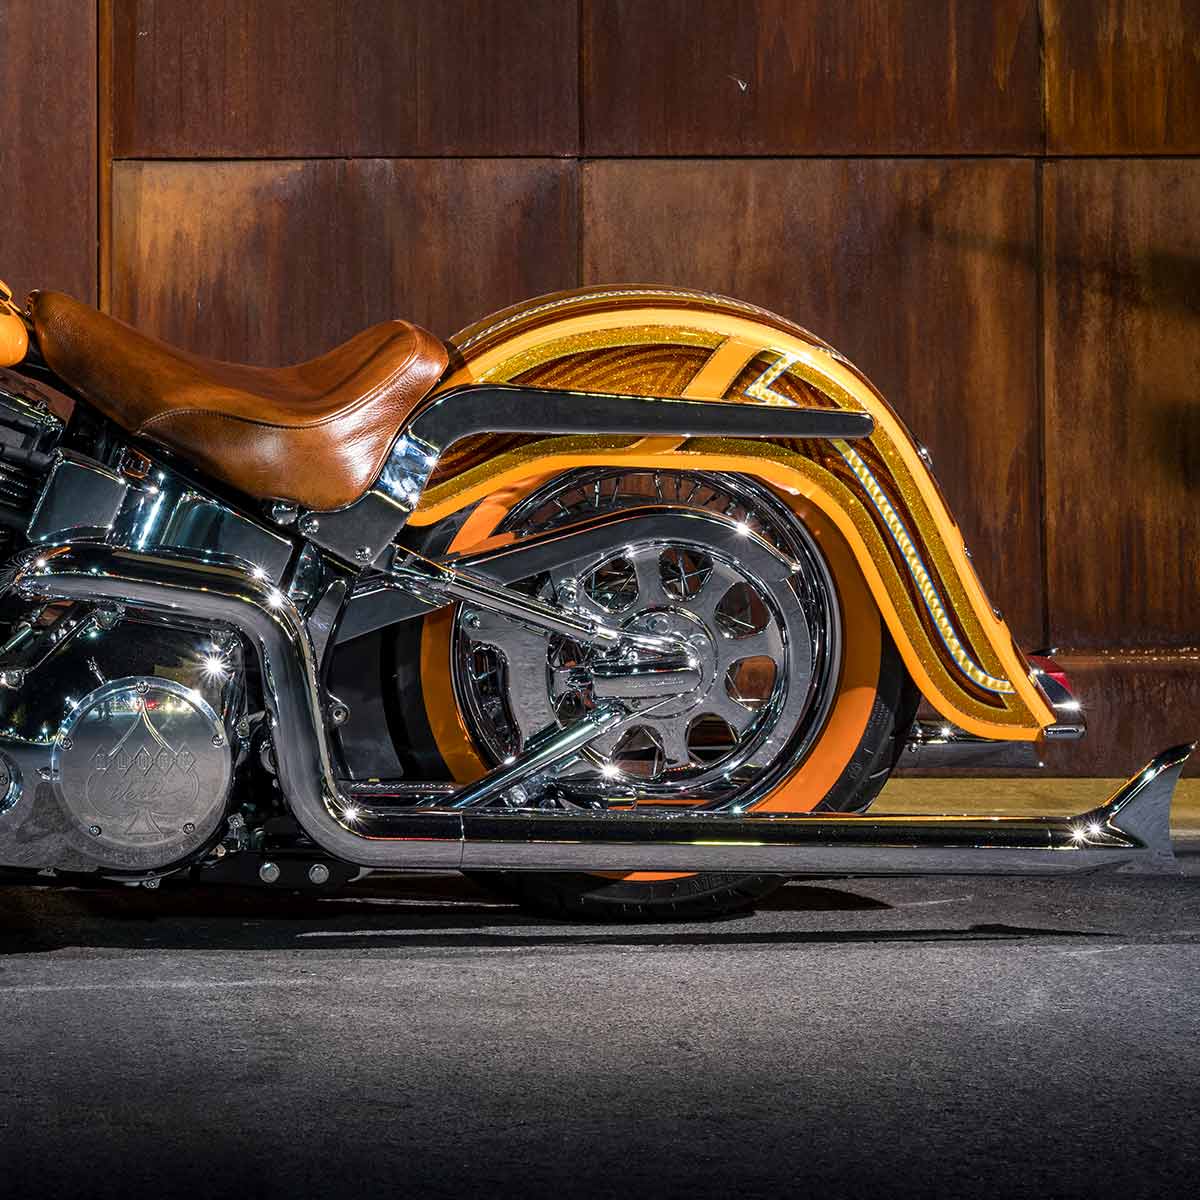 Extended Benchmark Rear Frenched Fenders for Harley-Davidson 2000-2017 Softail Motorcycles(Extended Rear Fender - Frenched)